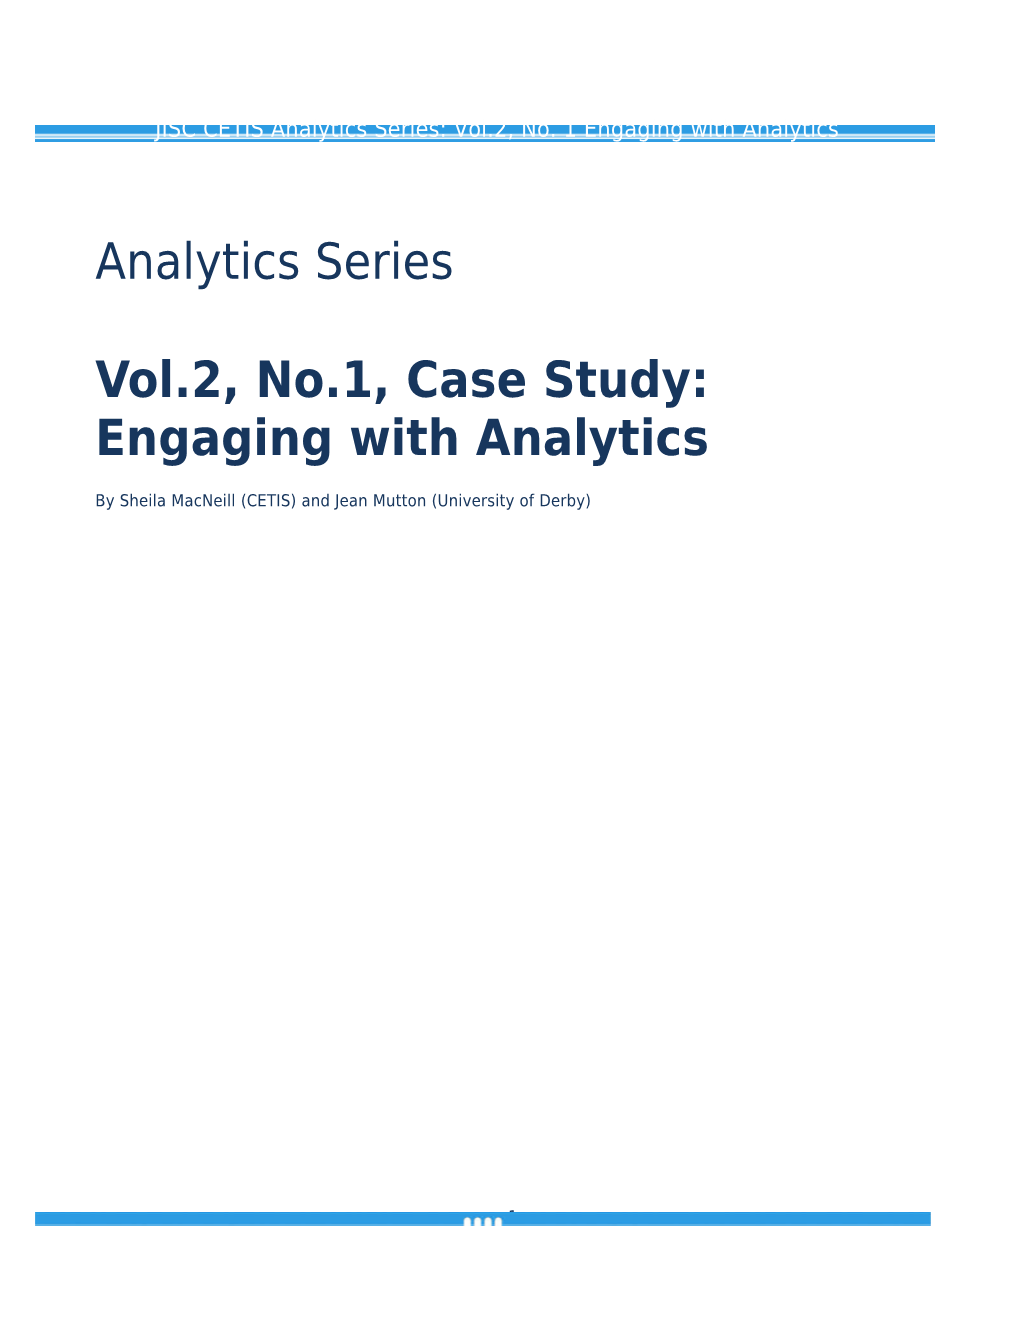 Case Study: Engaging with Analytics